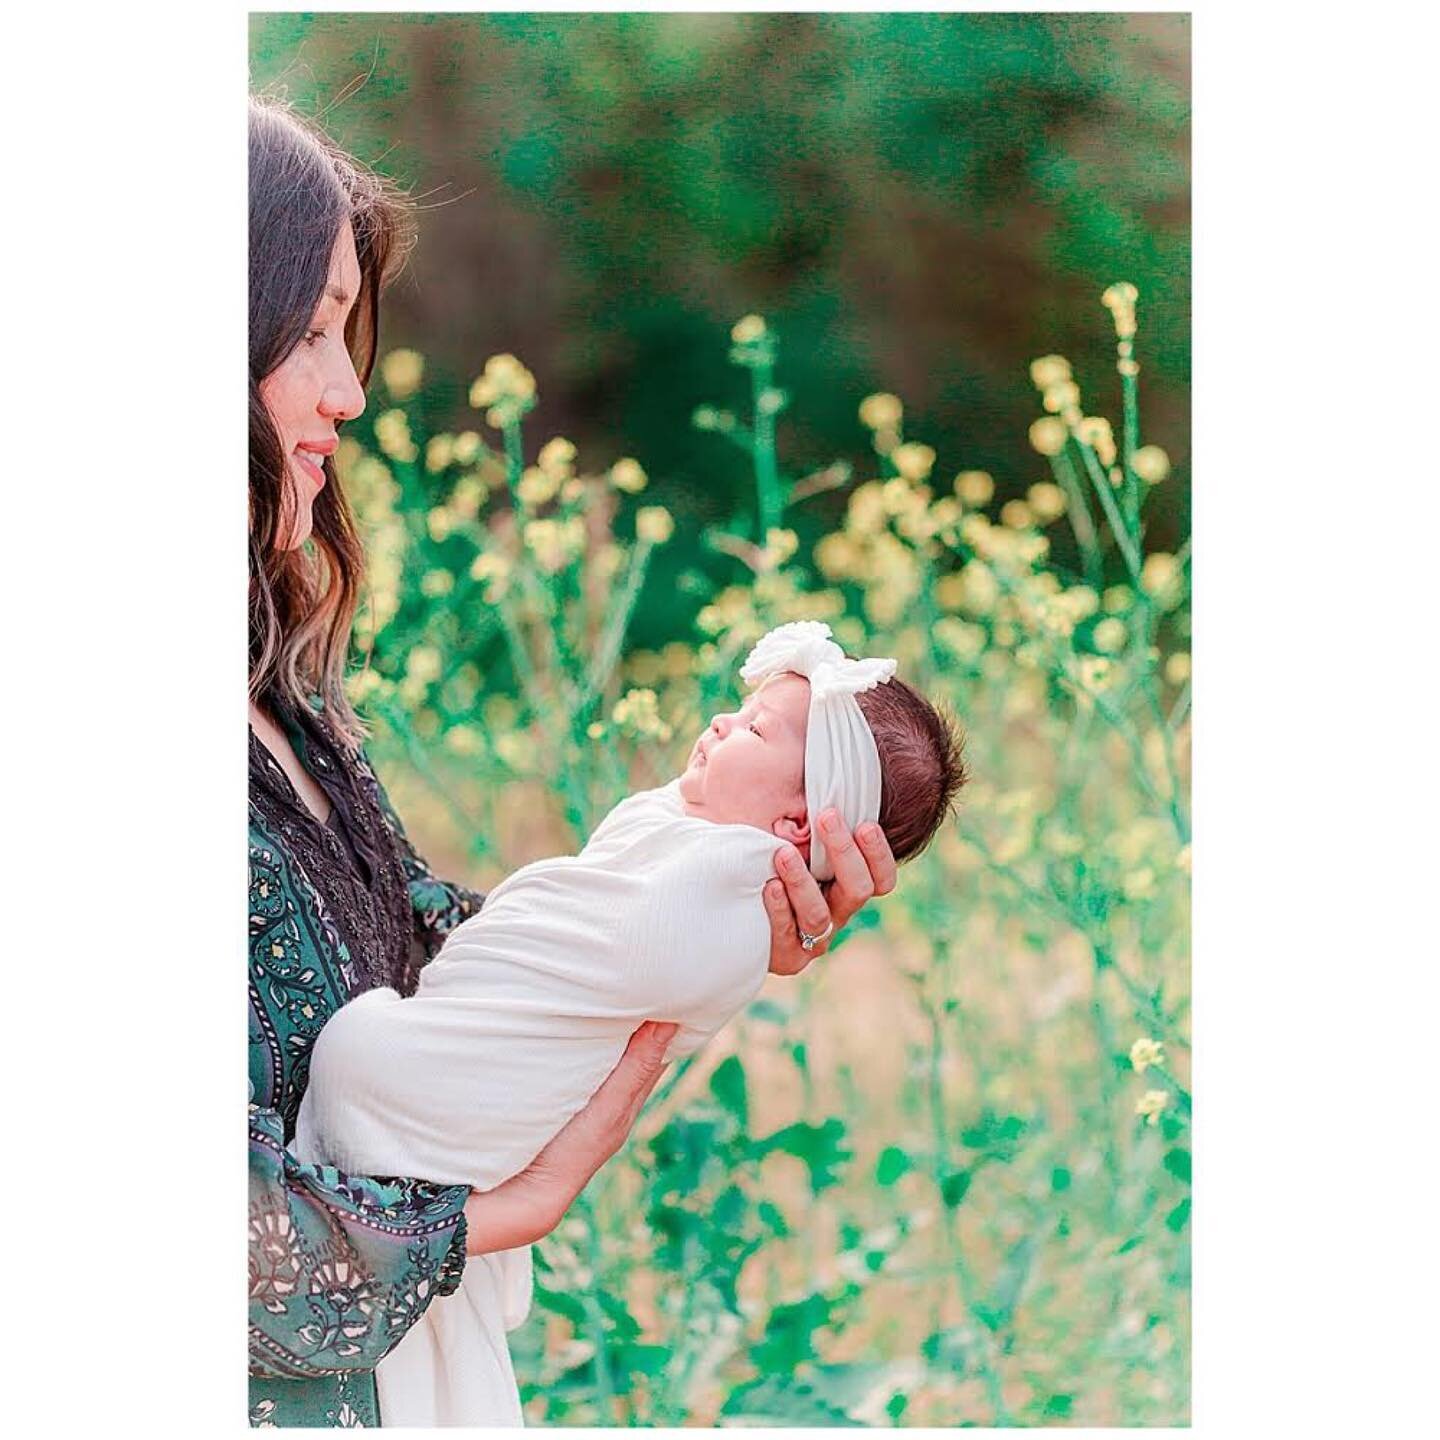 An outdoor newborn session was the best kind of session I could have done! So different but really fun and beautiful.

.
.
.
.
.
.

.
.
.
.
.
.
.
.
.
.
.
.
.
.
.
.
.
.
.
#erinchristinephotography #sandiegonewbornphotographer #maternityphotographer #s